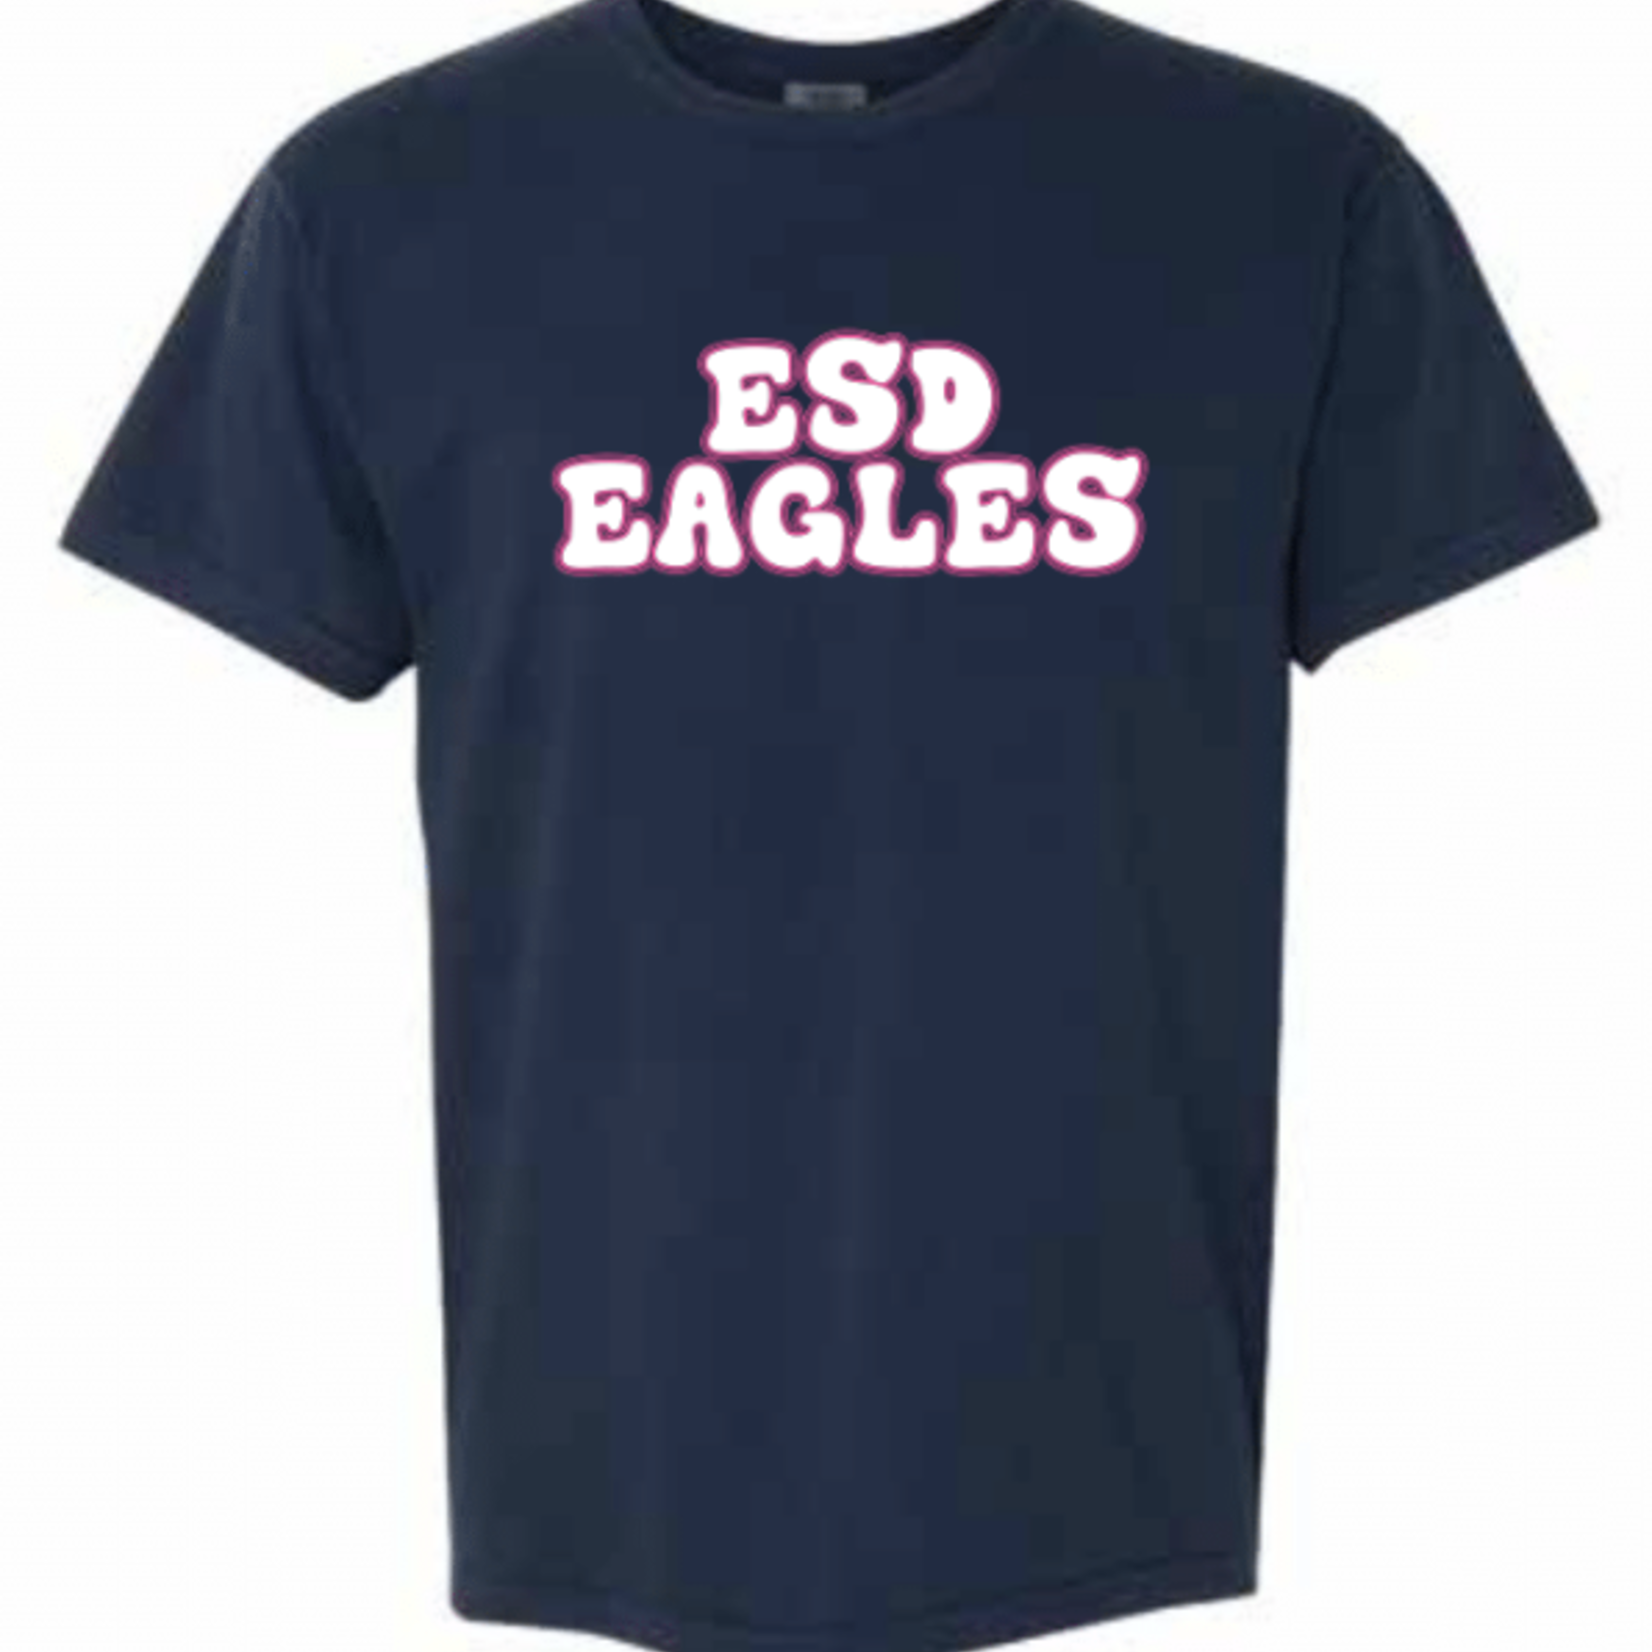 SUMMIT Navy Tee with Neon Pink and White ESD EAGLES